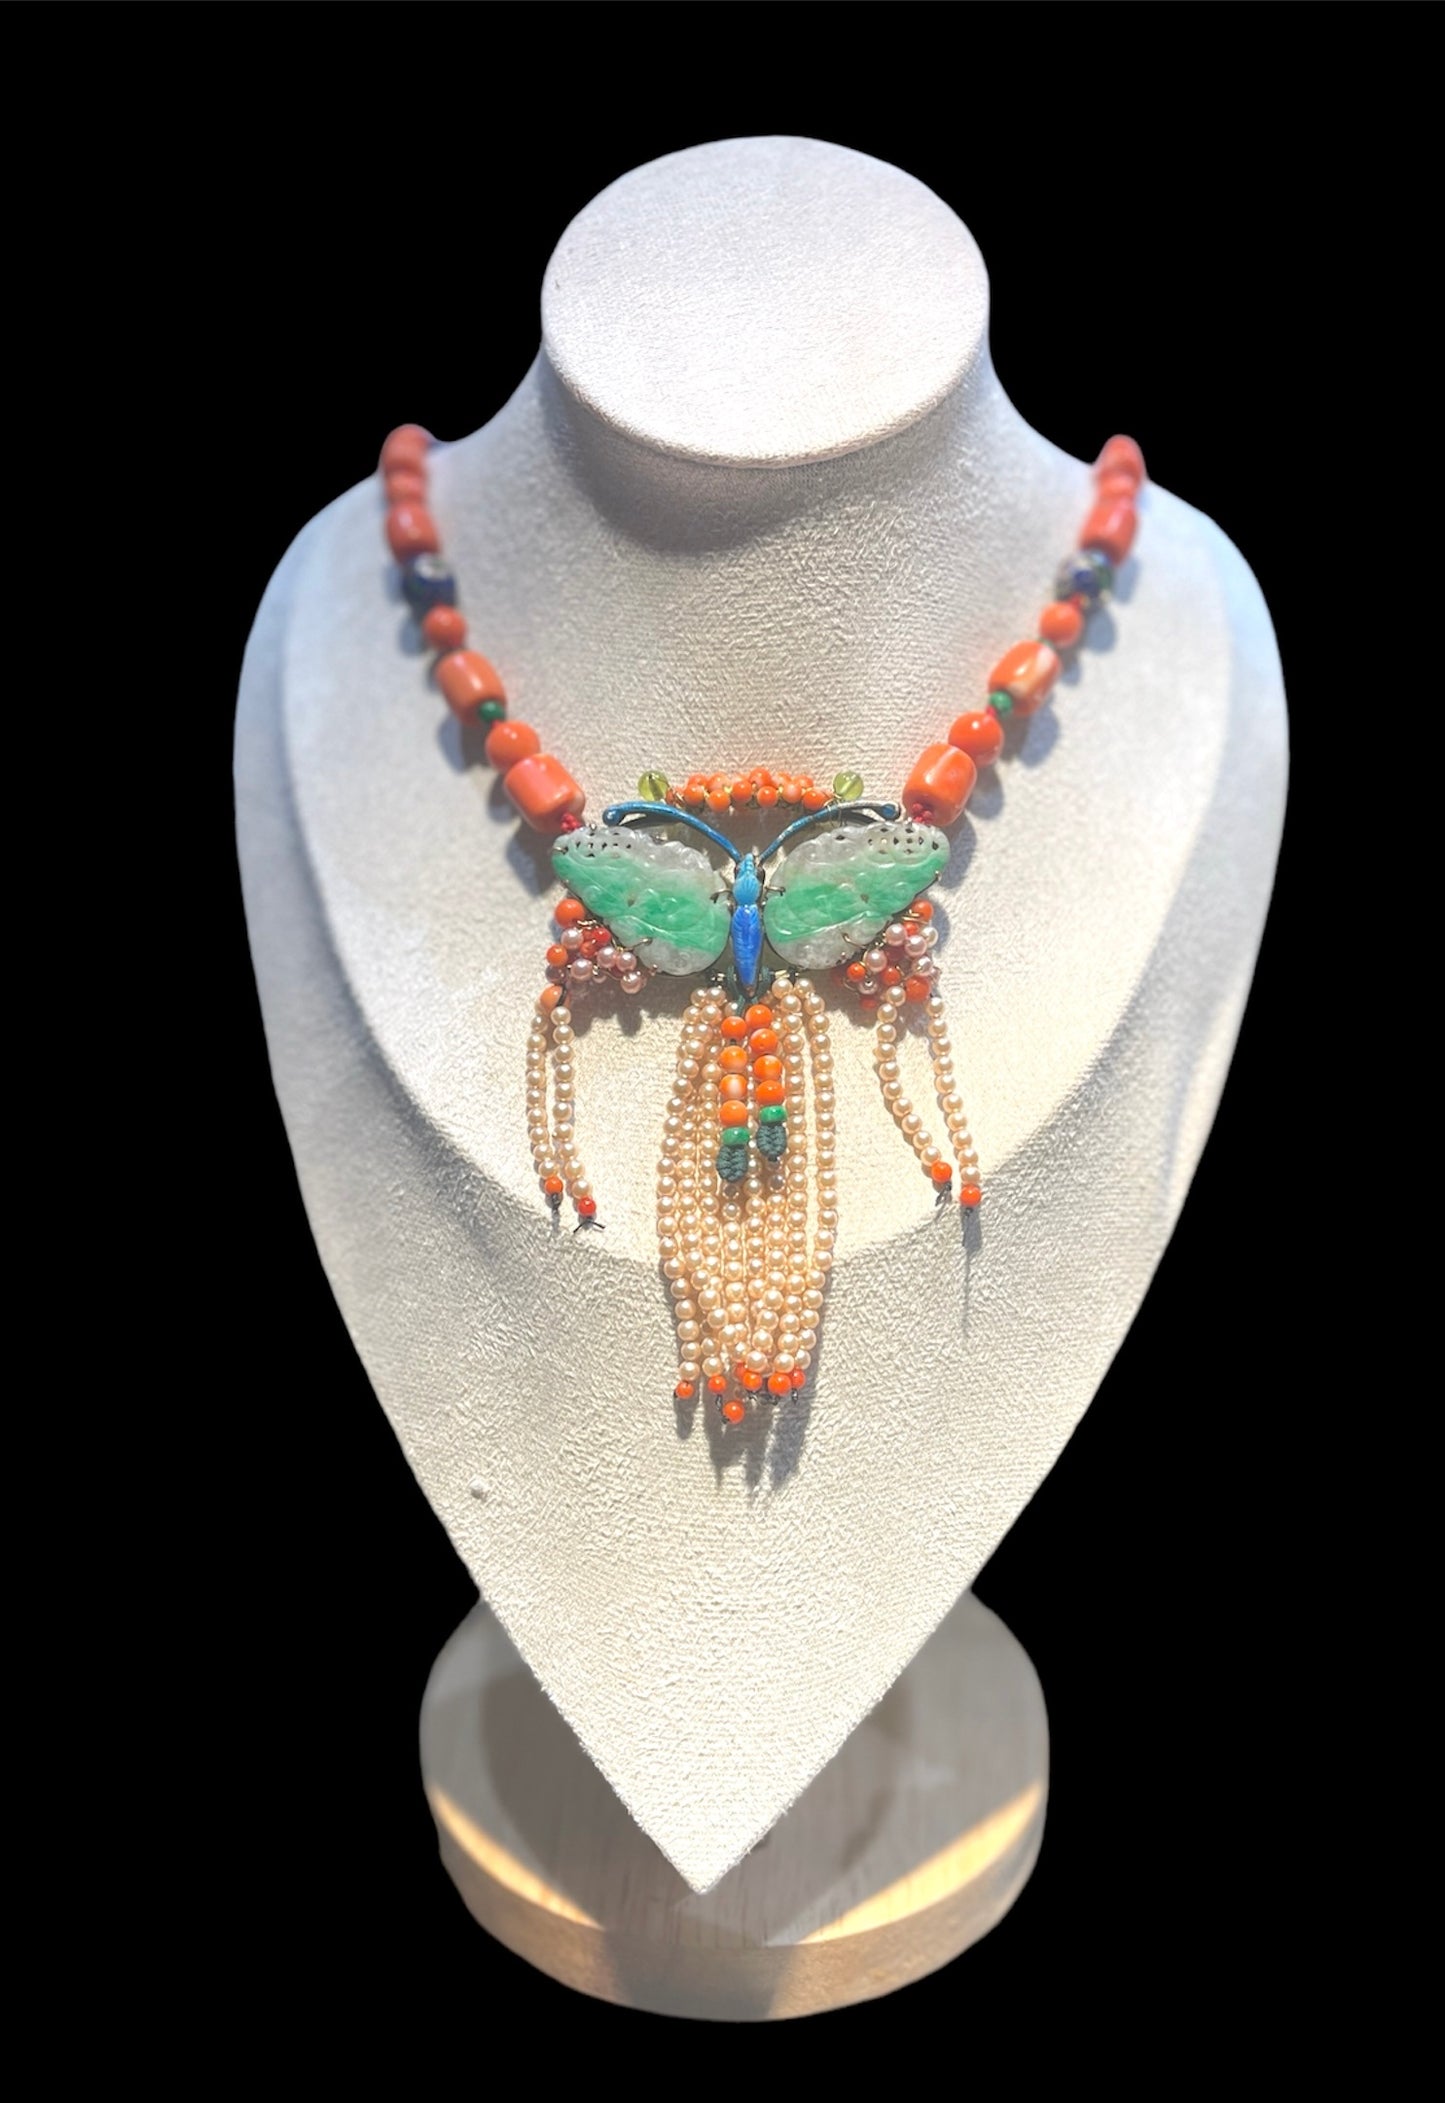 A jade butterfly pendant necklace with coral bead necklace